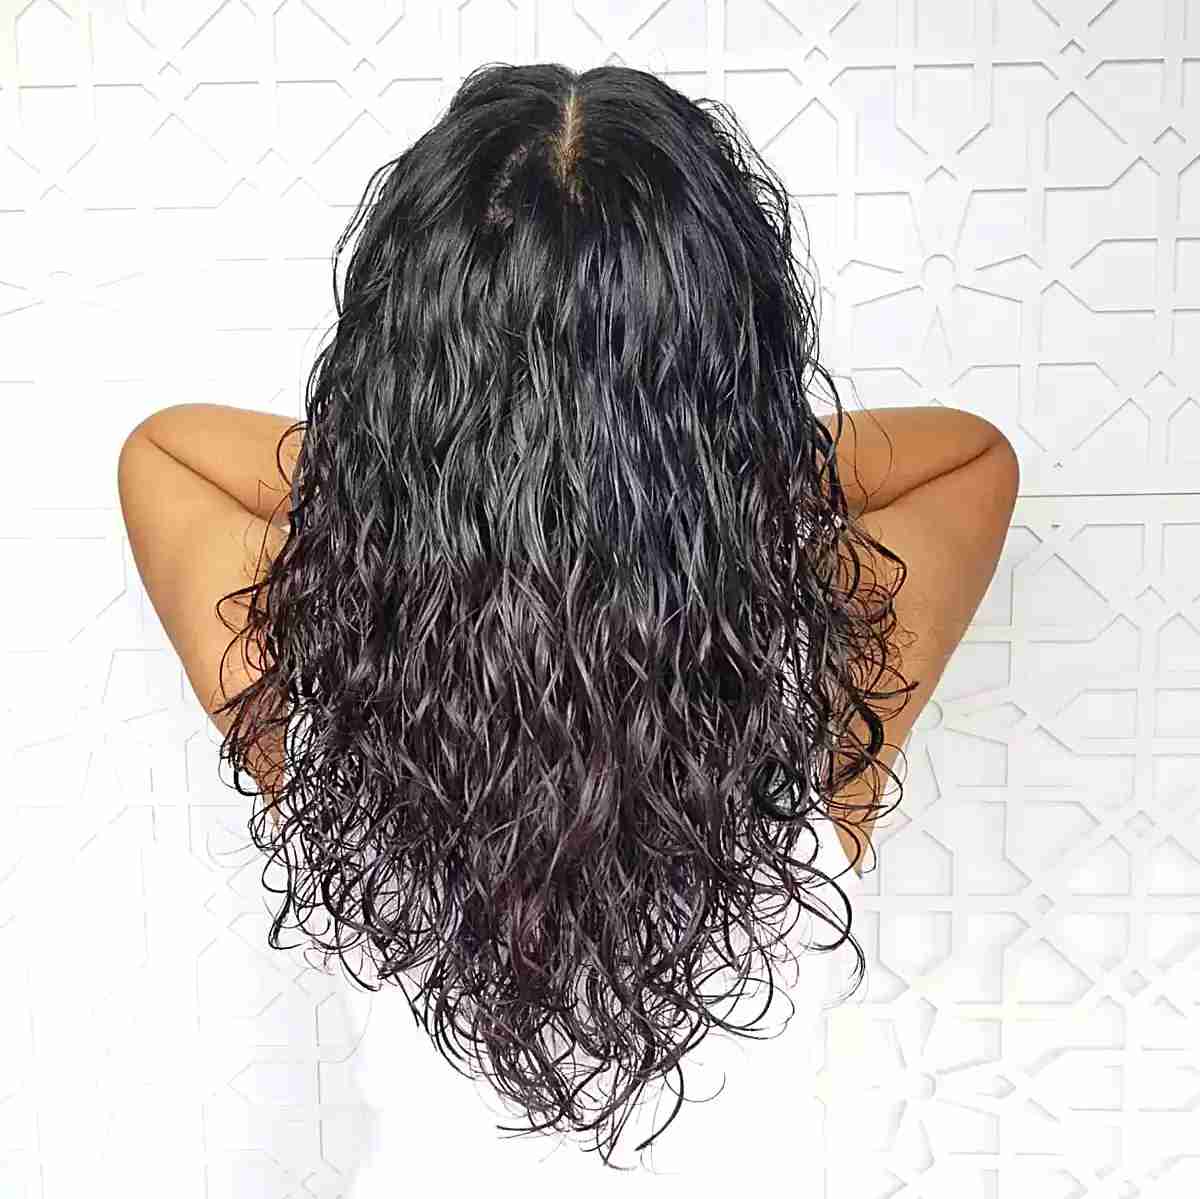 Curly Layered V-Cut with a Middle Part on Black-Haired Ladies